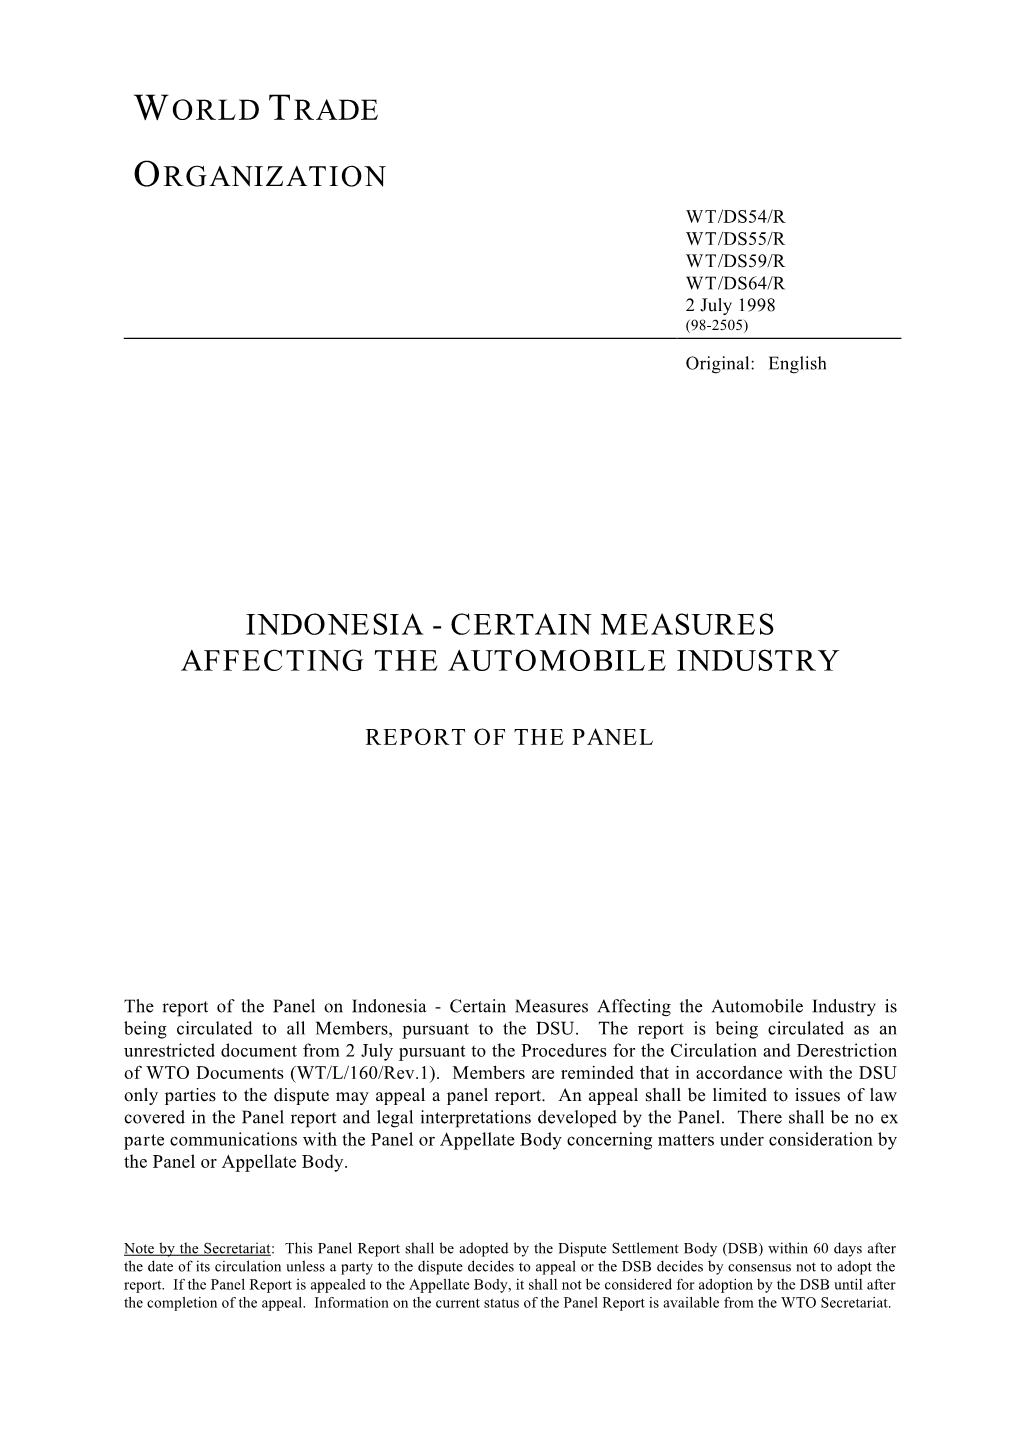 Indonesia - Certain Measures Affecting the Automobile Industry